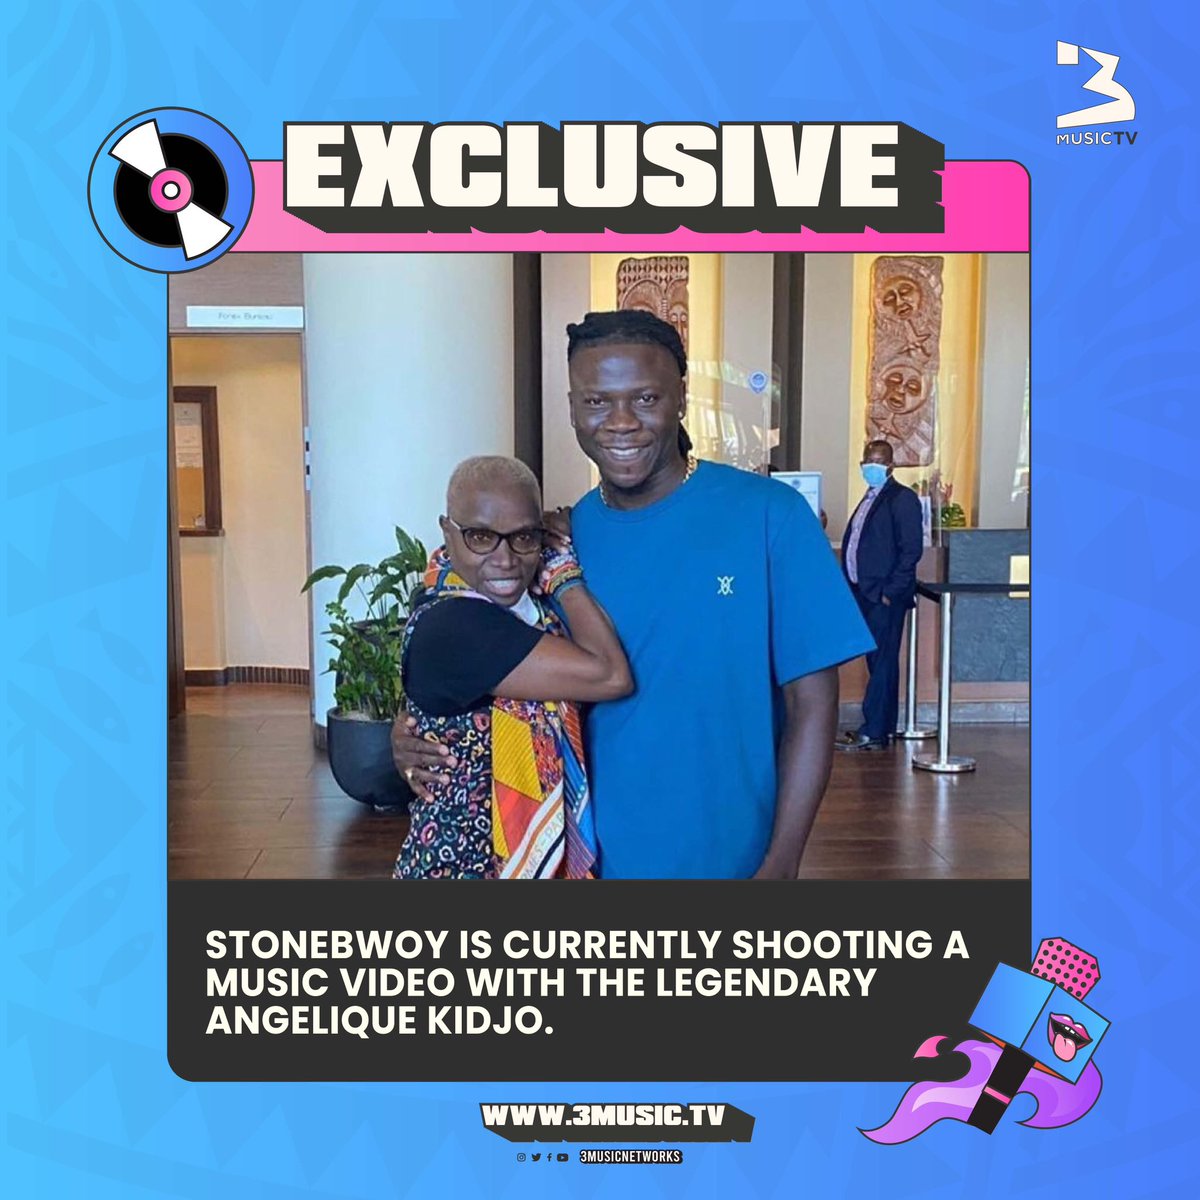 #Fr3shOut
BHIM Nation's President & Ghanaian AfroDancehall artiste, @stonebwoy, is in Paris shooting a music video with the legendary multiple Grammy award-winning singer, @angeliquekidjo, for his forthcoming album.
#ThisIsTheCulture #3MusicTV